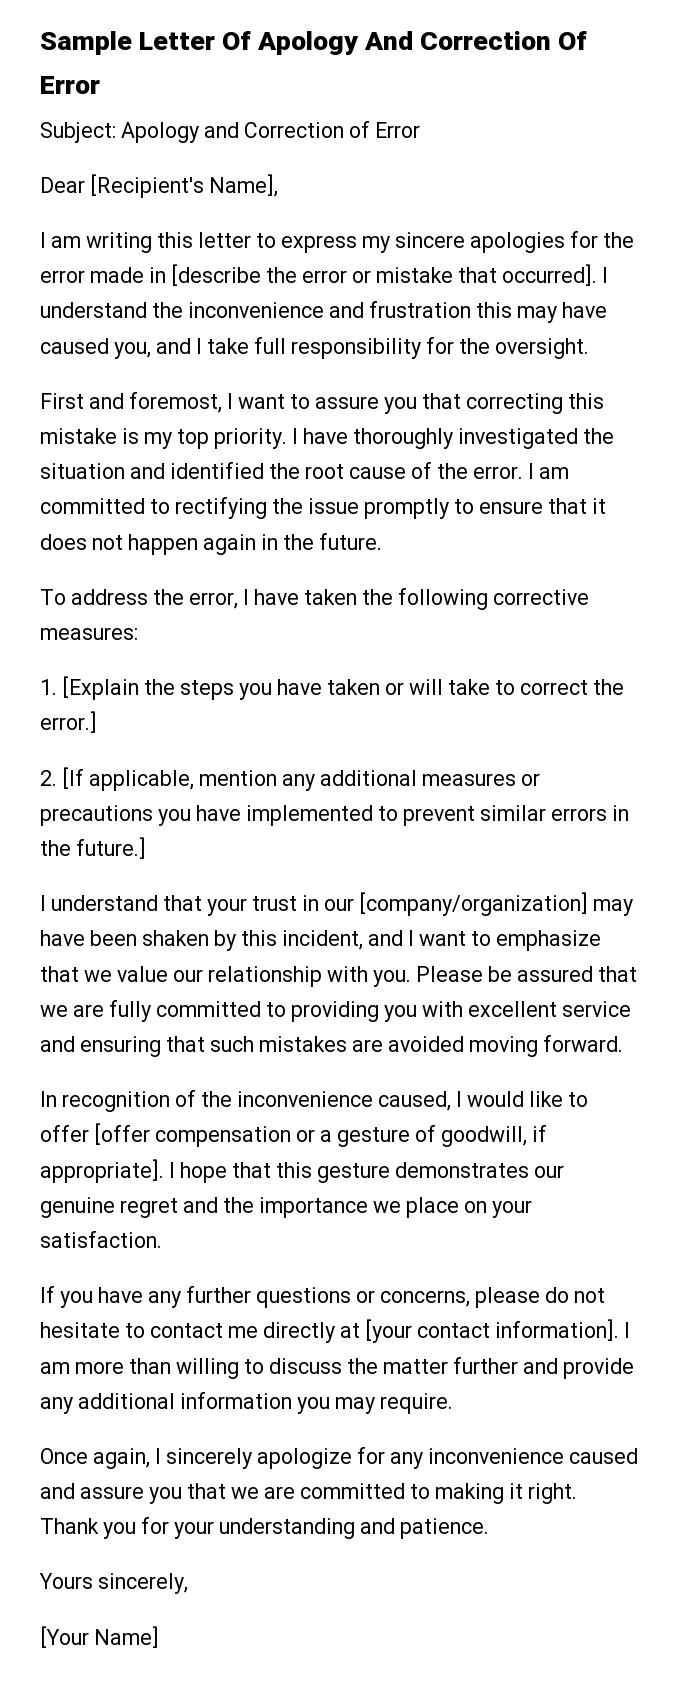 Sample Letter Of Apology And Correction Of Error